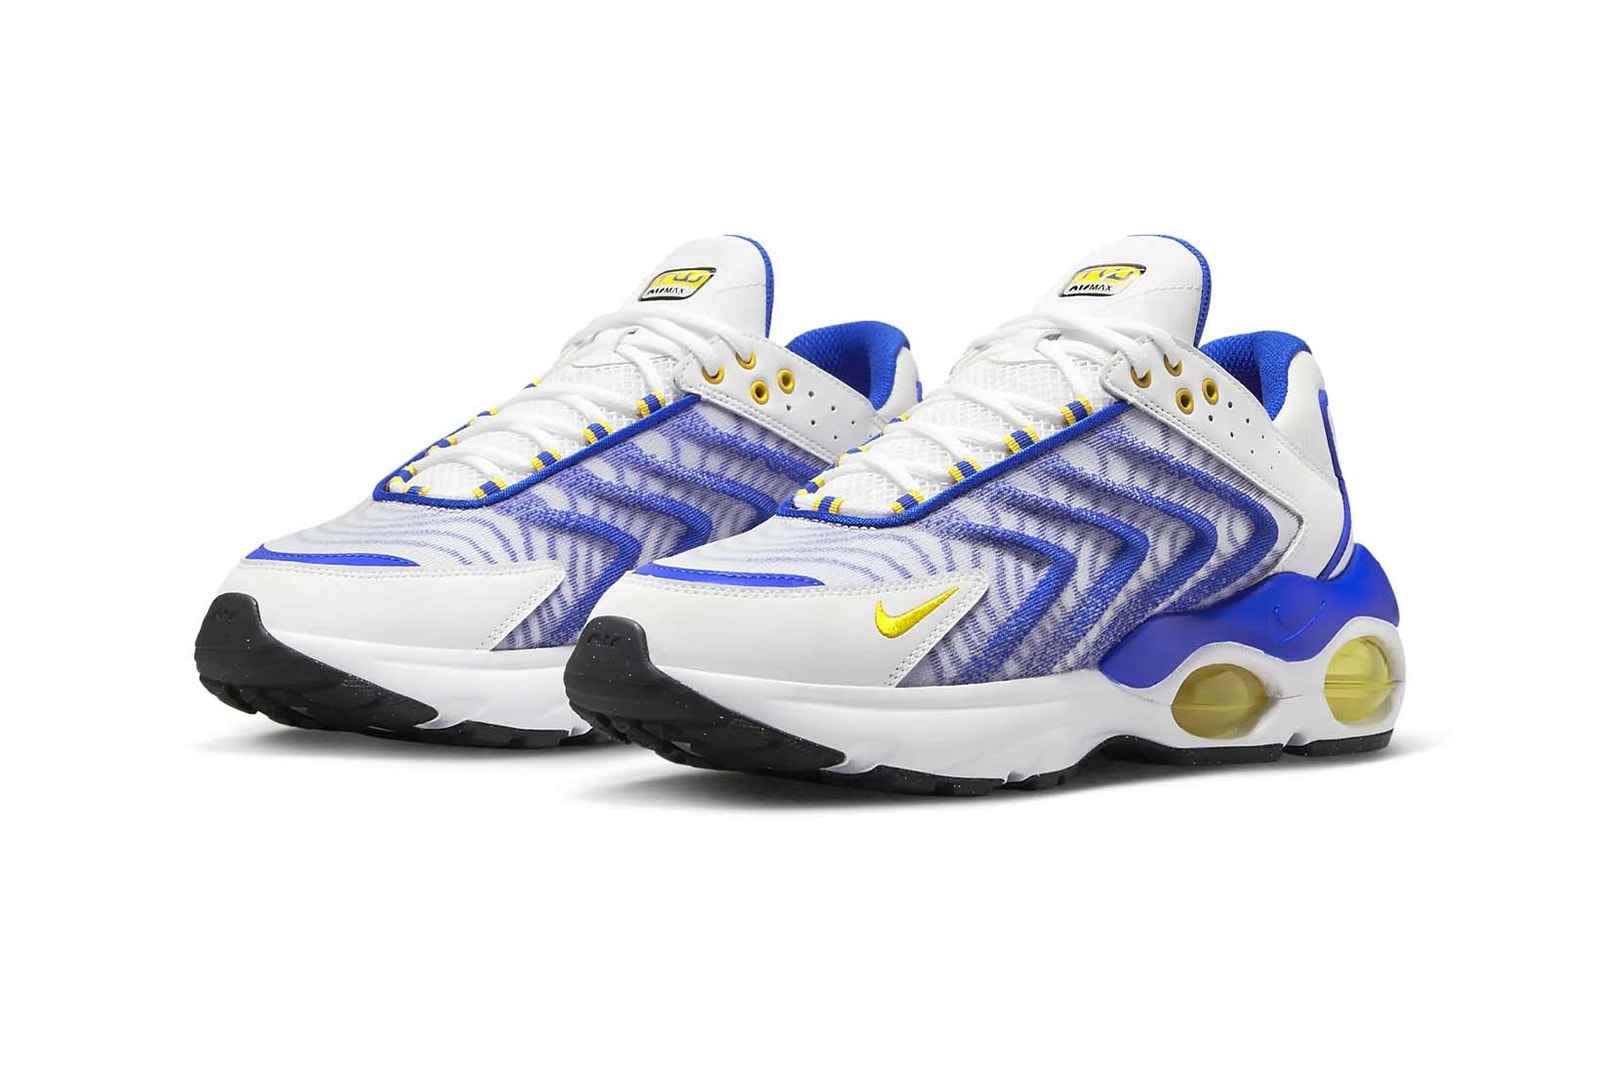 Nike Air Max TN Black White Racer Blue Speed Yellow Move to Zero Sustainability DQ3984-100 DQ3984-001 Release Date